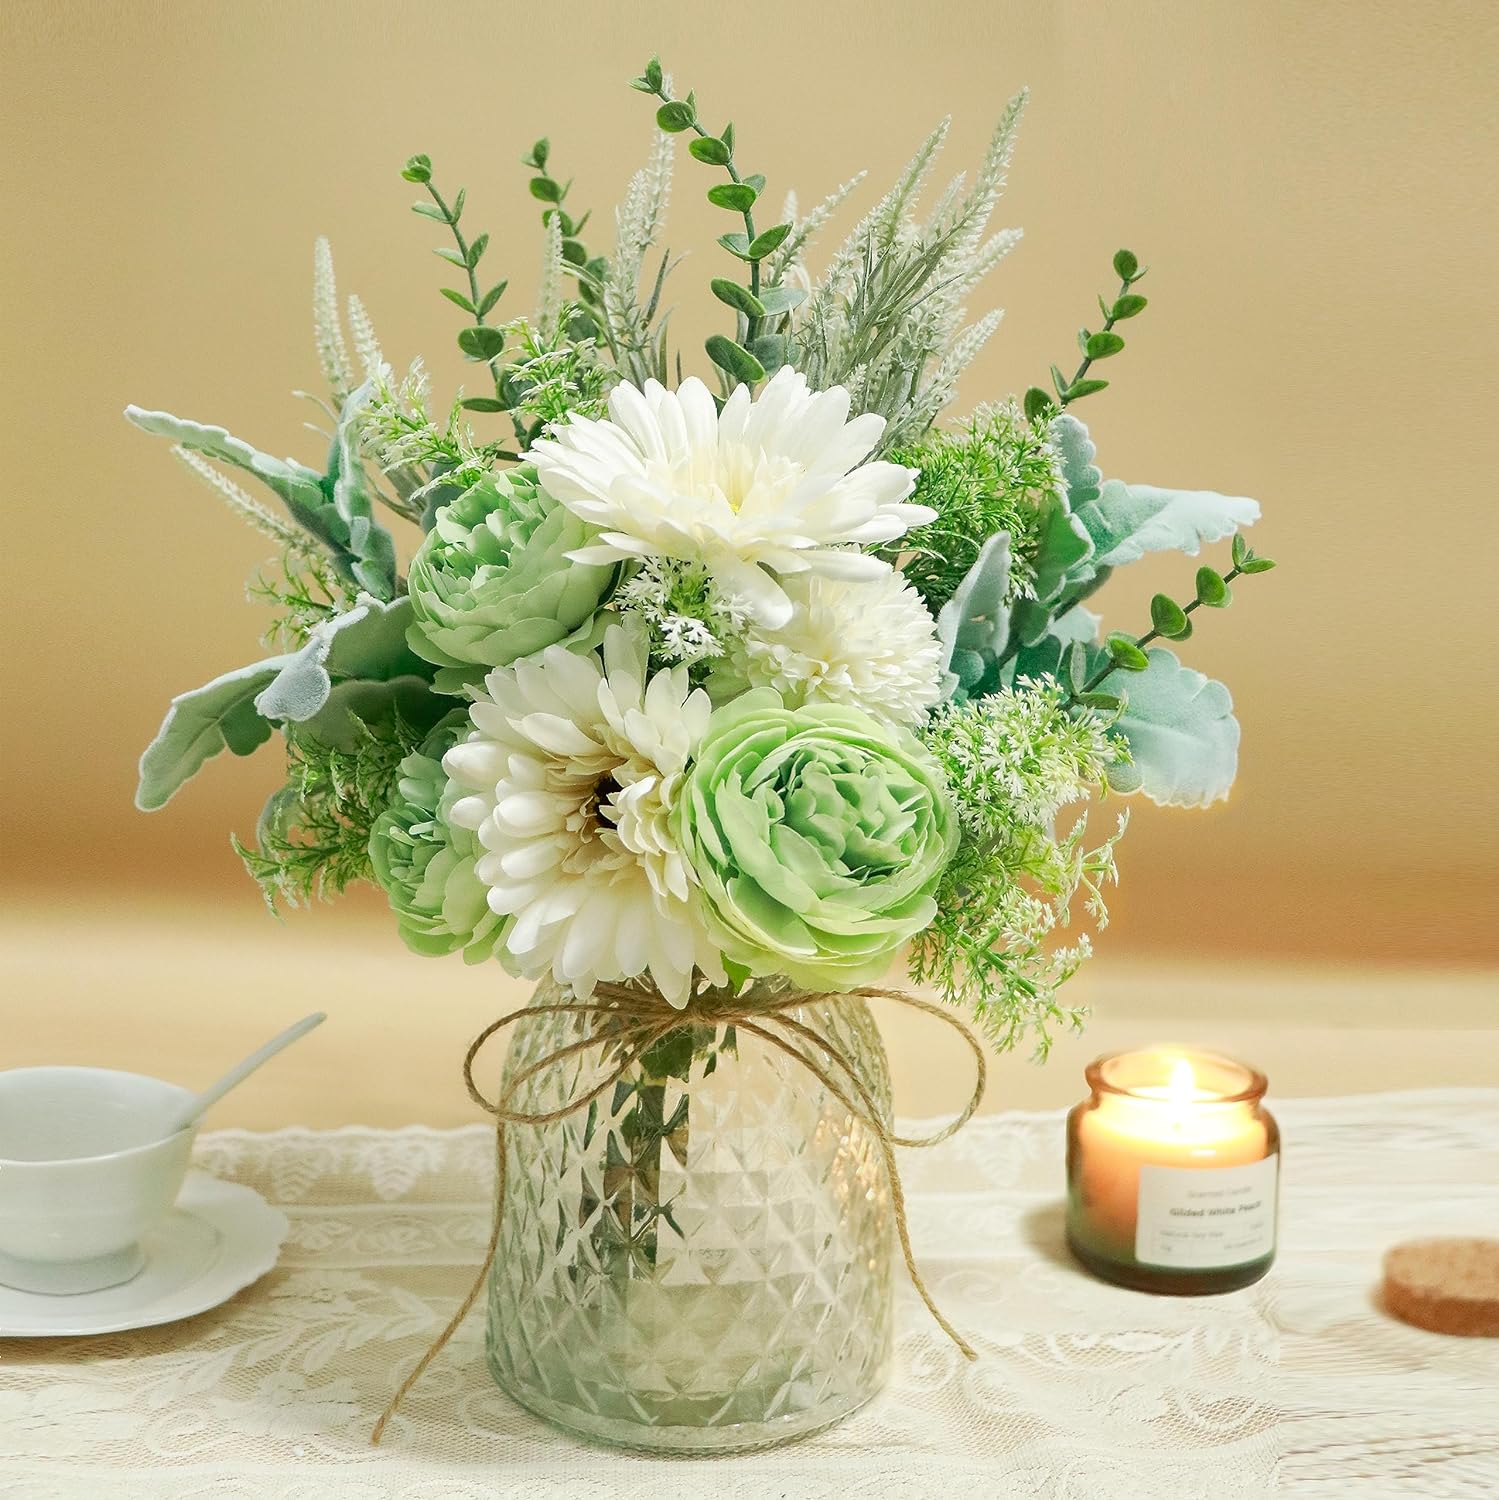 Artificial Flowers with Vase Fake Floral Arrangement in Vase Suitable for Home Kitchen Decor,Farmhouse Dinning Table Centerpieces,Coffee Table Decoration.